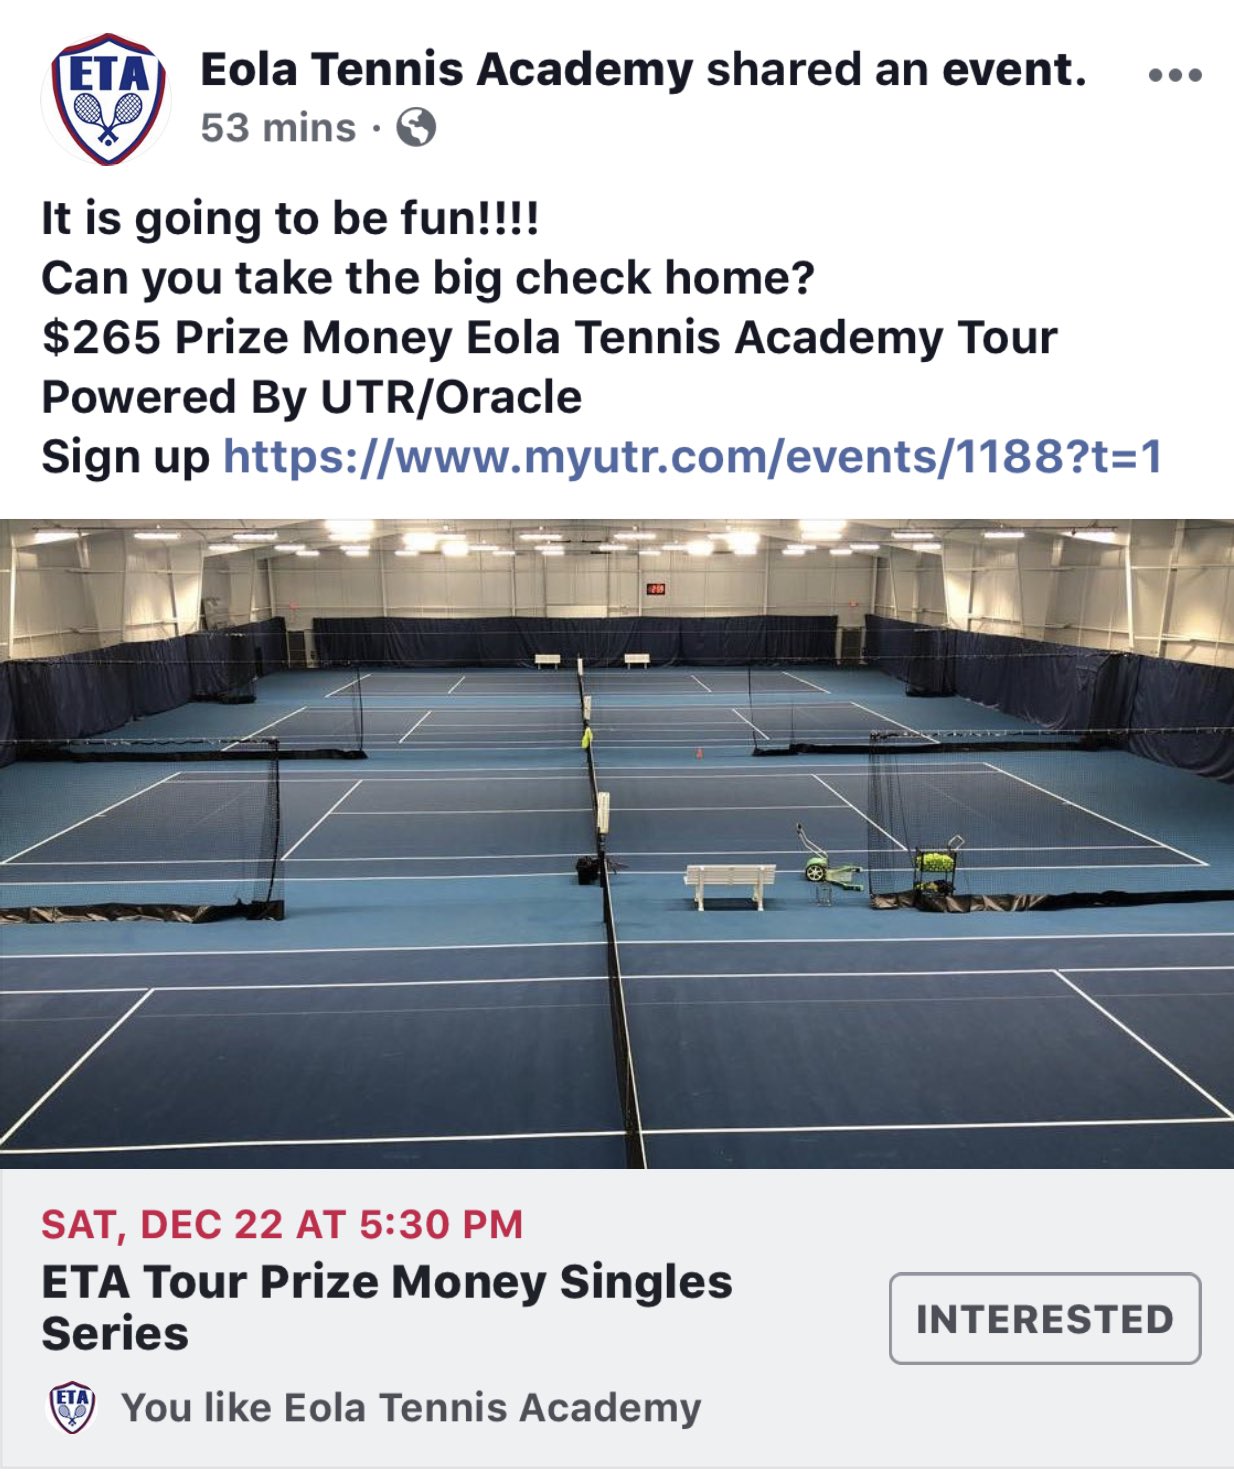 Cress Creek Tennis On Twitter It Is Going To Be Fun Can You Take The Big Check Home 265 Prize Money Eola Tennis Academy Tour Powered By Utroracle Sign Up Httpstcojsn4fhrcfx Myutr